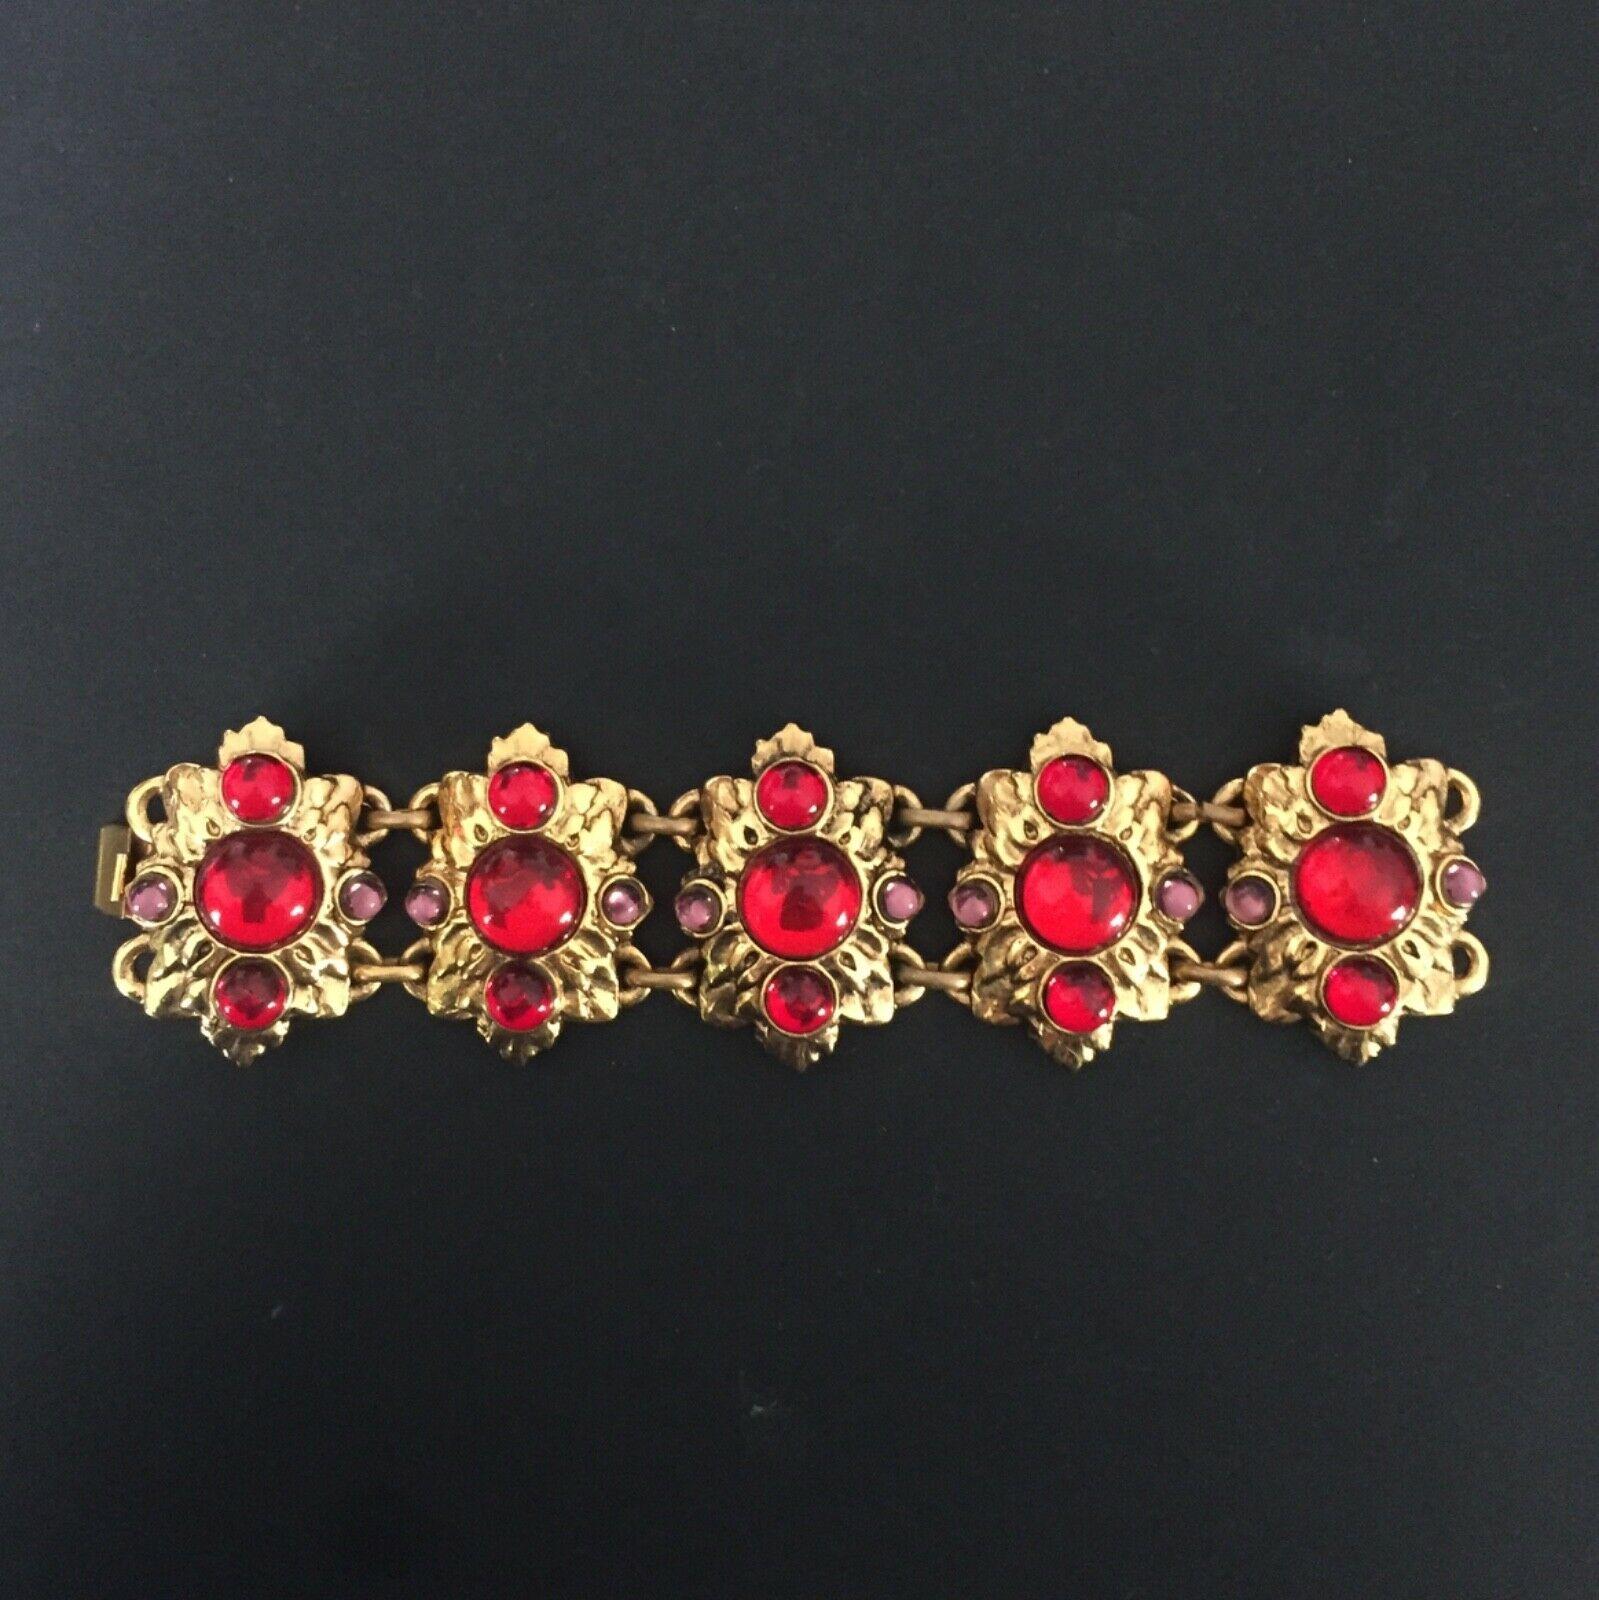 Sublime neo baroque BRACELET,
vintage 1980s,
by essential designer DOMINIQUE DENAIVE,
high fashion,
in resin and glass cabochons,
length 20 cm, height 5.5 cm, weight 111 g,
good condition.

(if you are interested in an SET (BRACELET + NECKLACE) -